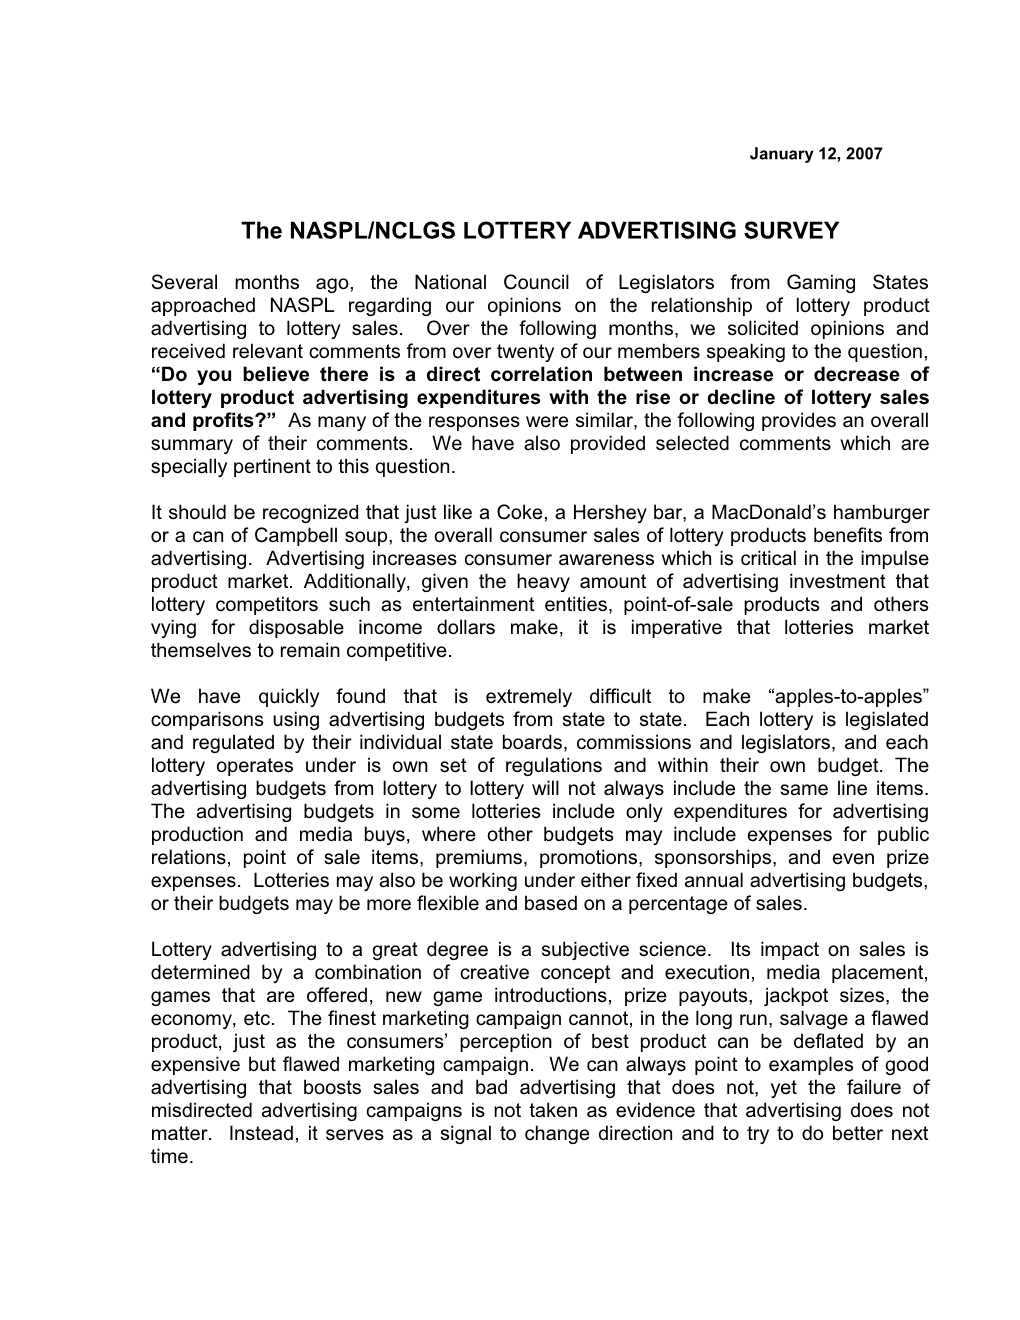 The NASPL/NCLGS LOTTERY ADVERTISING SURVEY